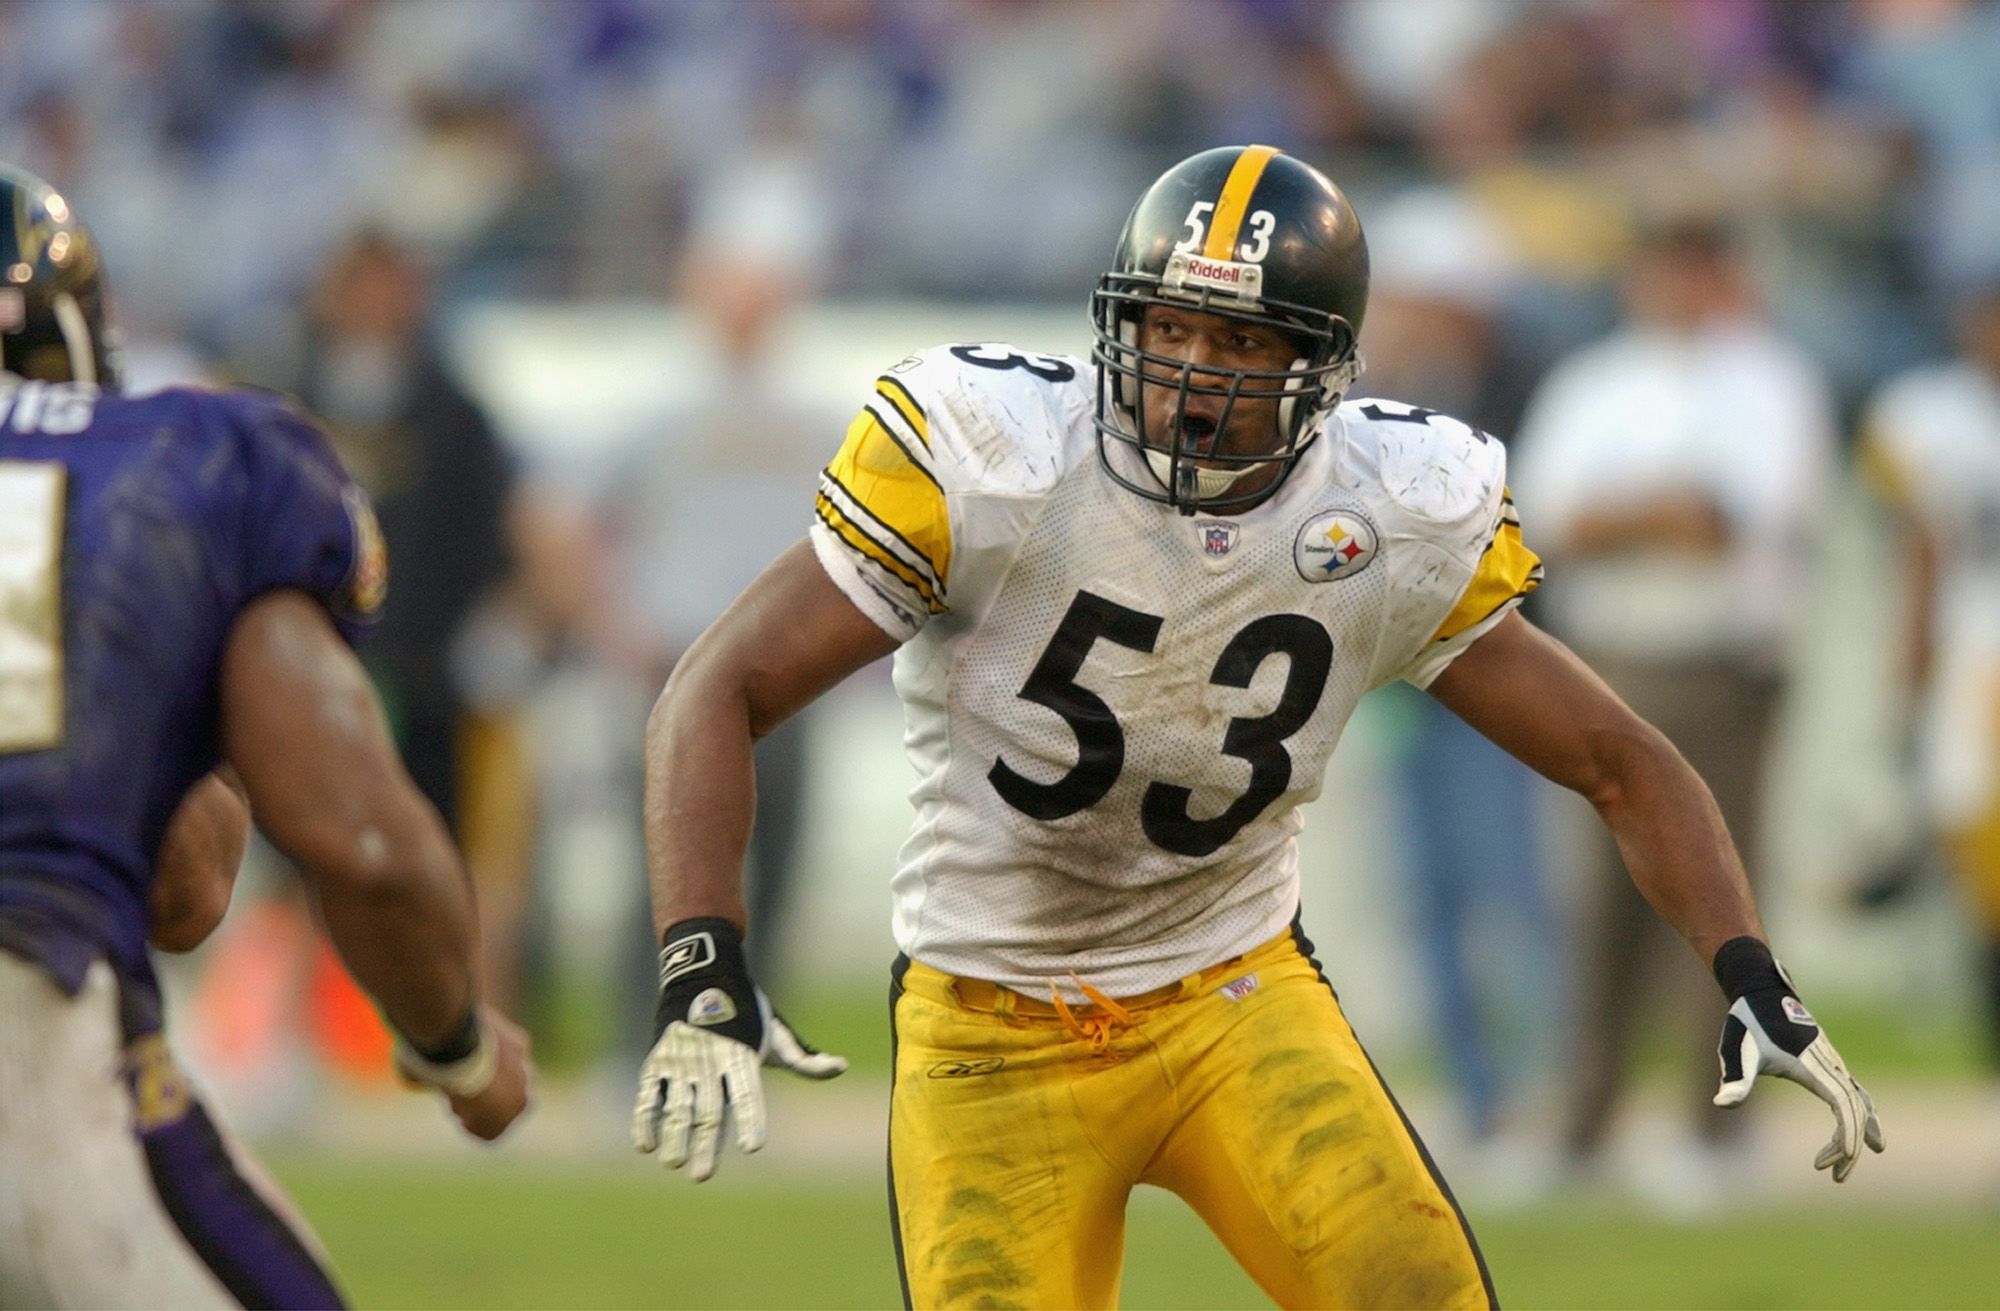 Clark Haggans, longtime NFL linebacker who won a Super Bowl with the  Steelers, dies at 46